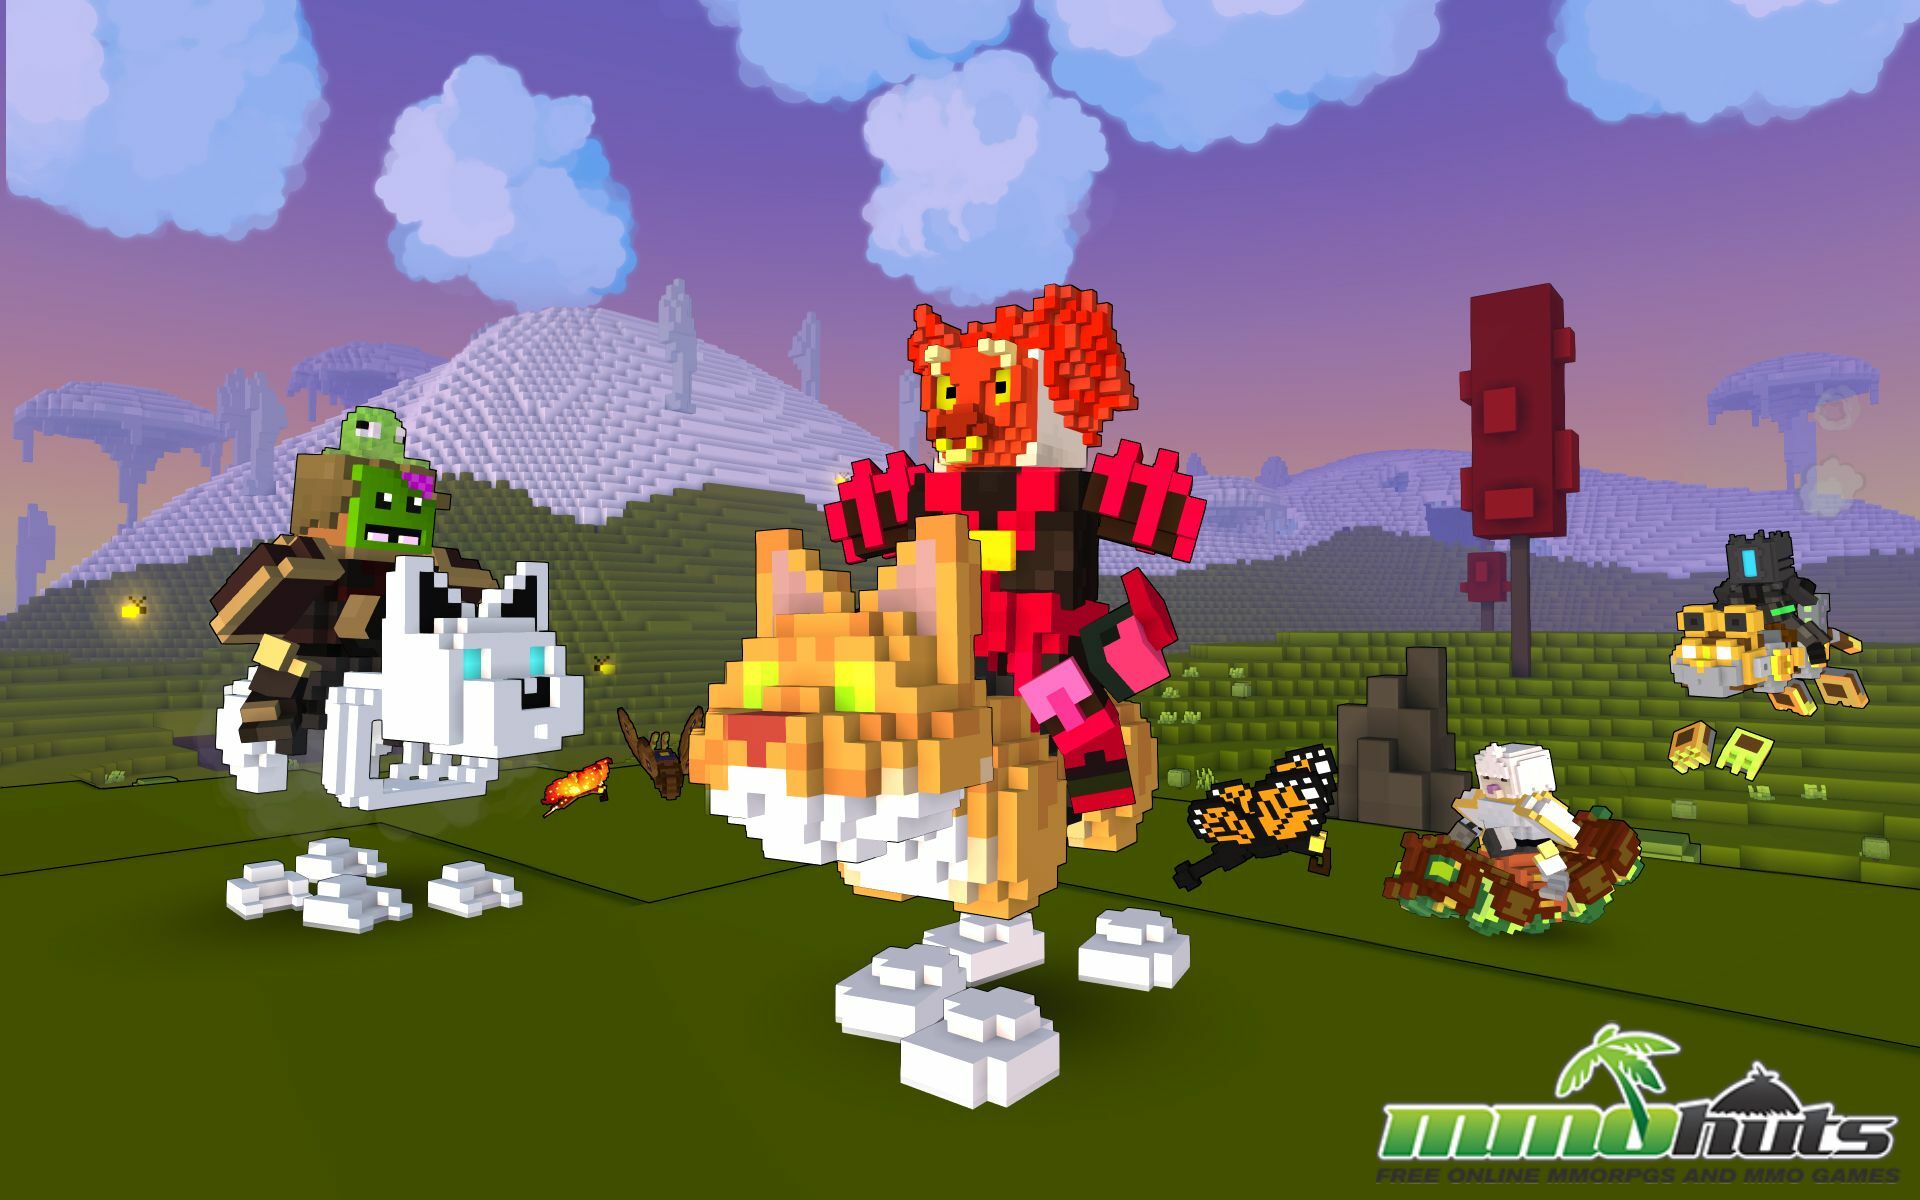 TROVE_POSE_Meownts_GroupOfMeownts_01